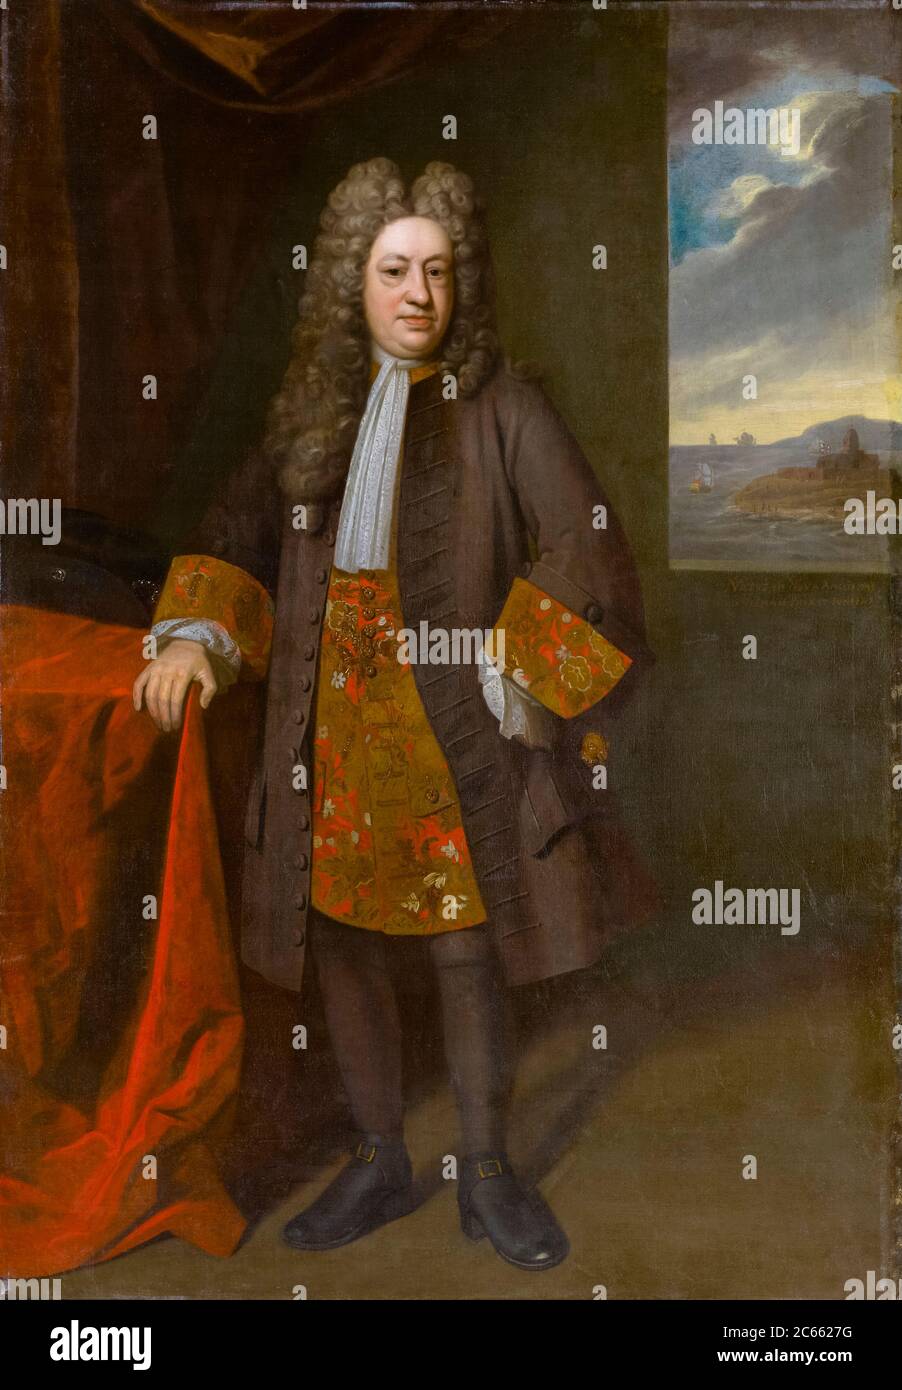 Governor Elihu Yale (1649-1721), East India Company, Fort St George, Madras, India, portrait painting by Enoch Seeman the younger, 1717 Stock Photo